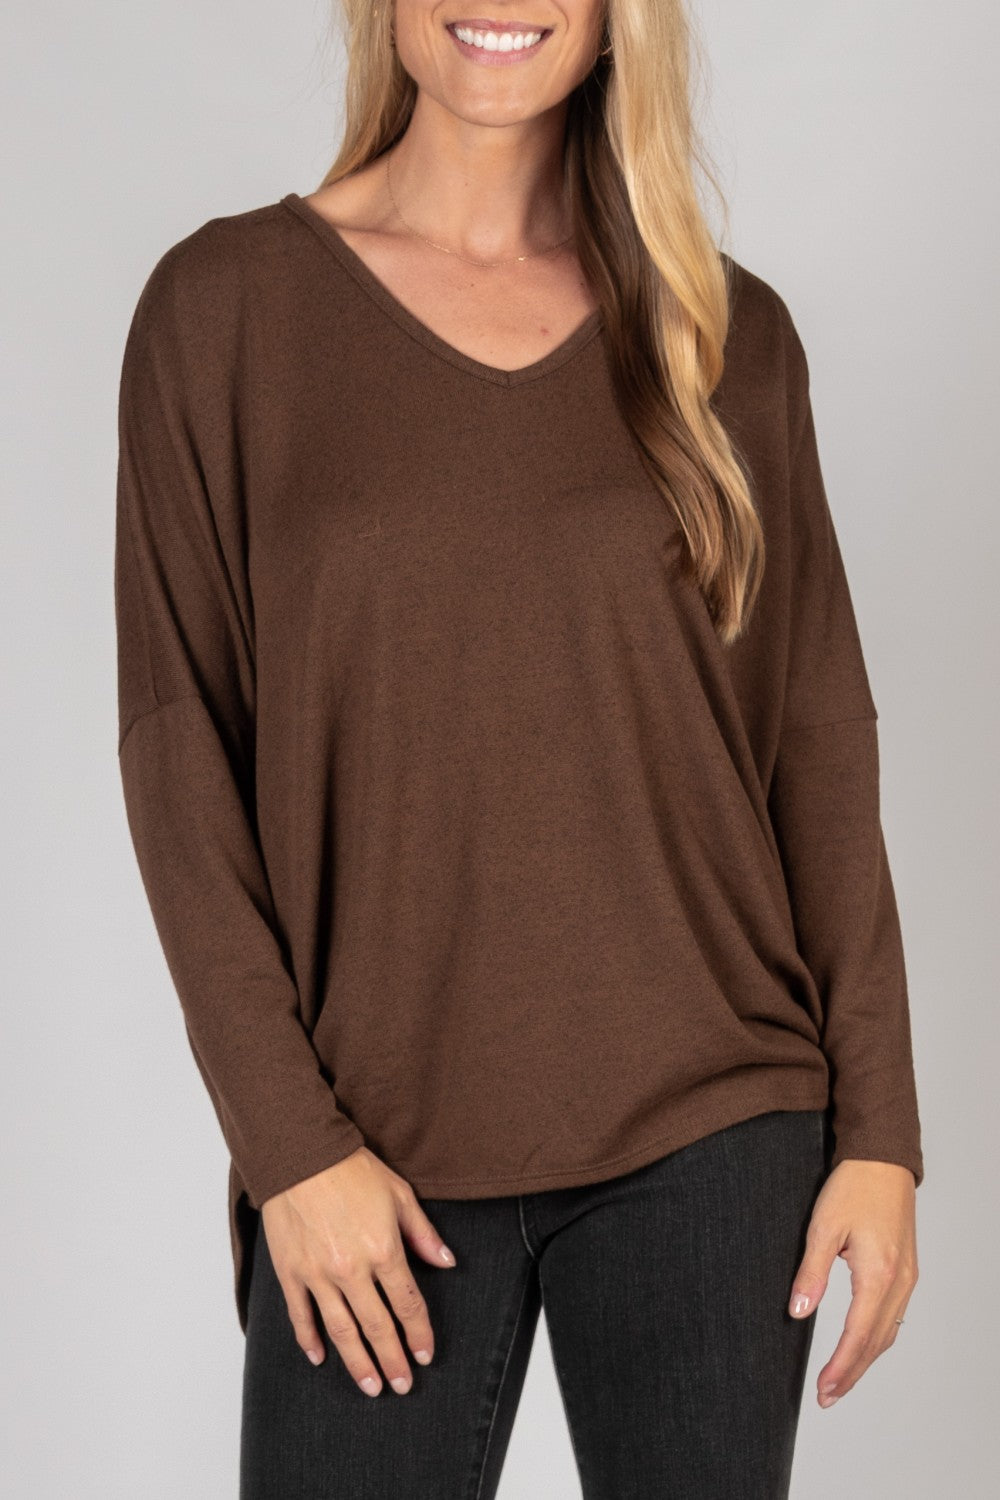 BEFORE YOU COLLECTION HACCI FABRIC V-NECK DOLMAN SLEEVE TOP COCOA